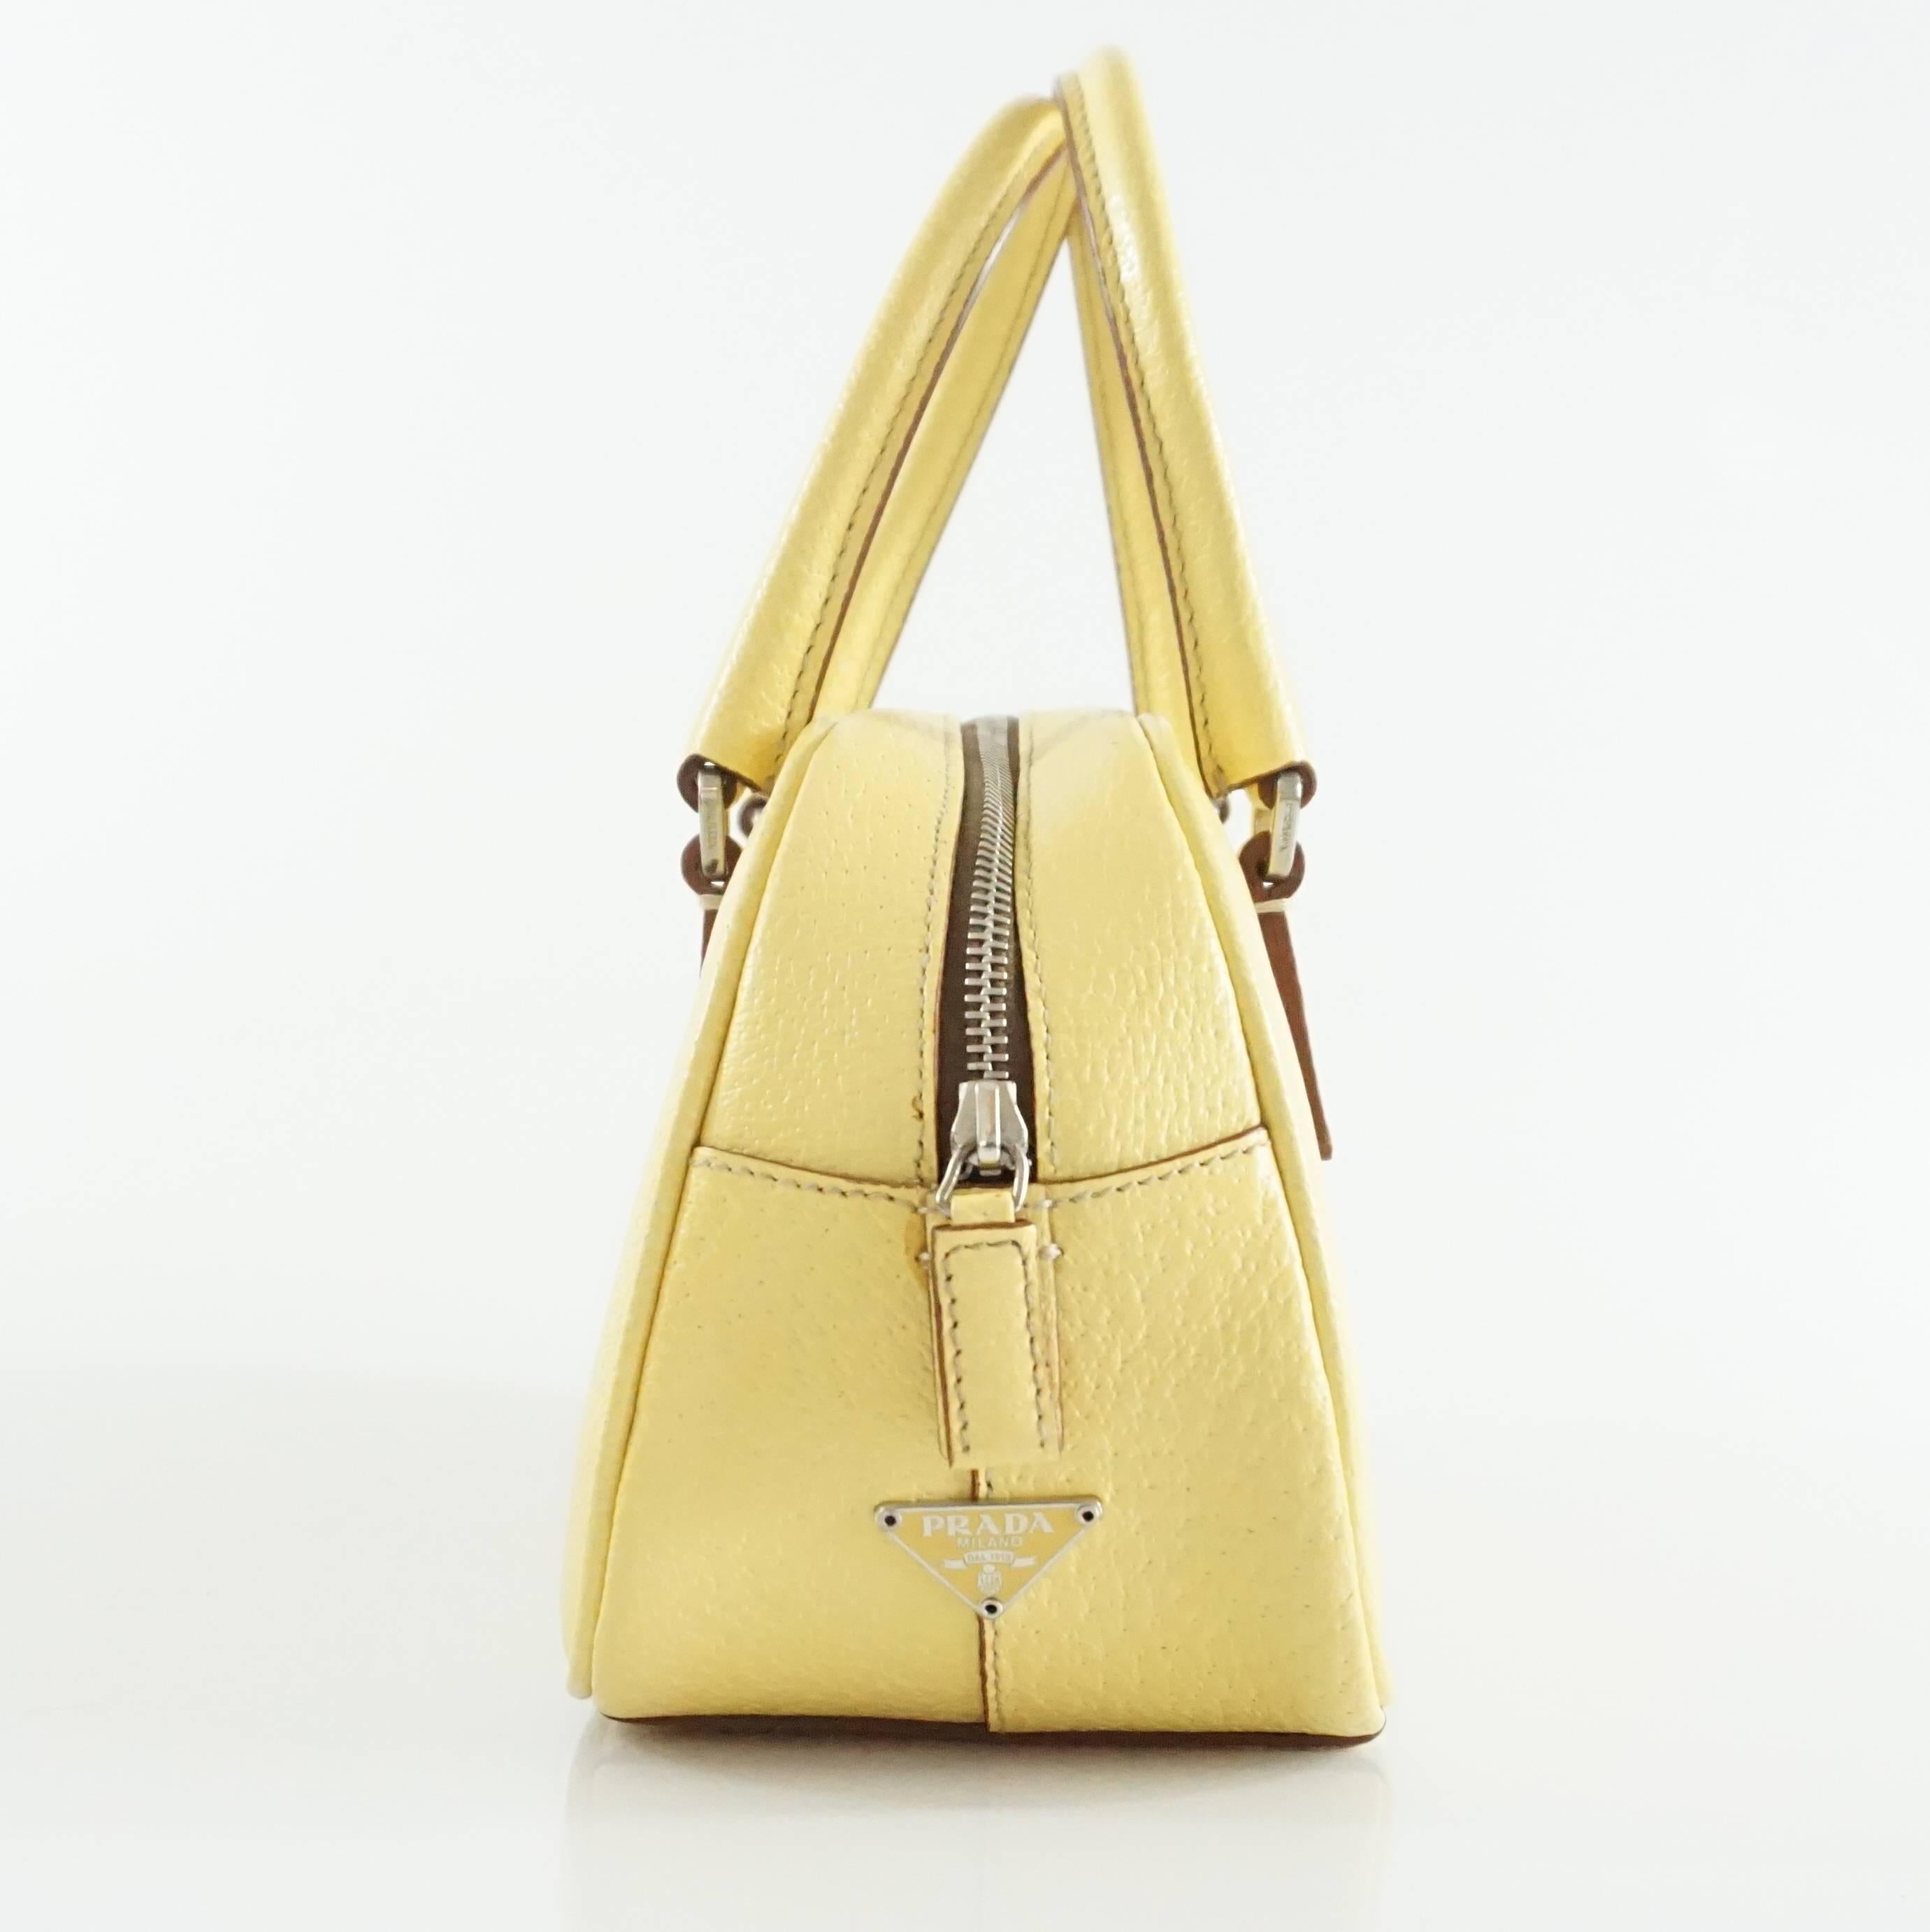 This Prada yellow top handle bag is a mini size and is leather. It has a zipper, two handle, an interior zipper pocket, and silver hardware. This bag is in fair condition with overall staining on the leather as seen in the last images.